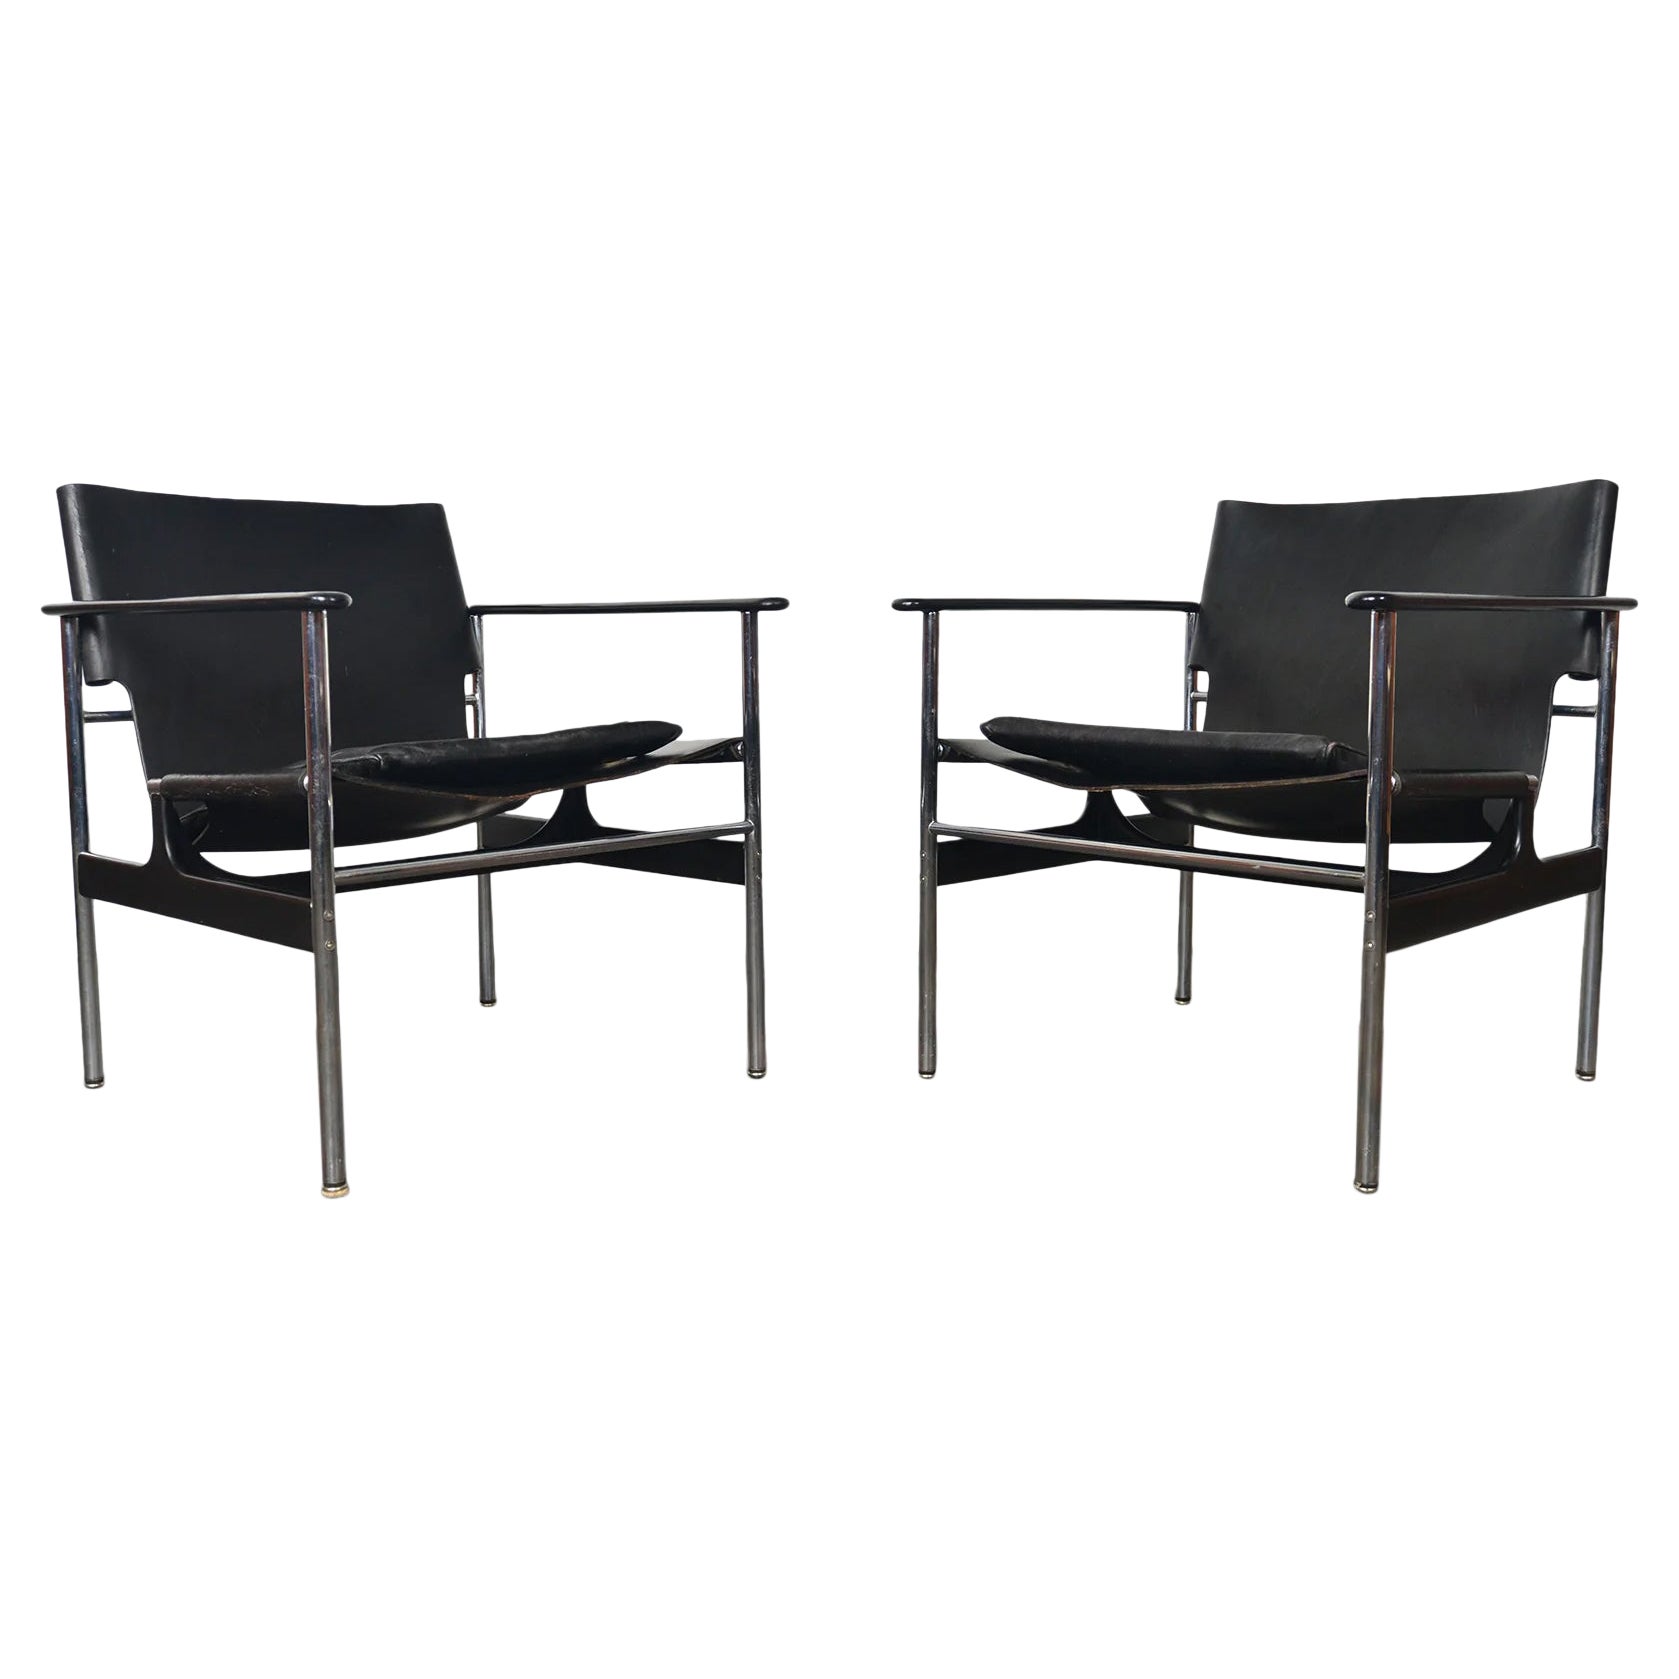 Pair of 1960s Charles Pollock "657" Lounge Chairs in Leather + Chrome